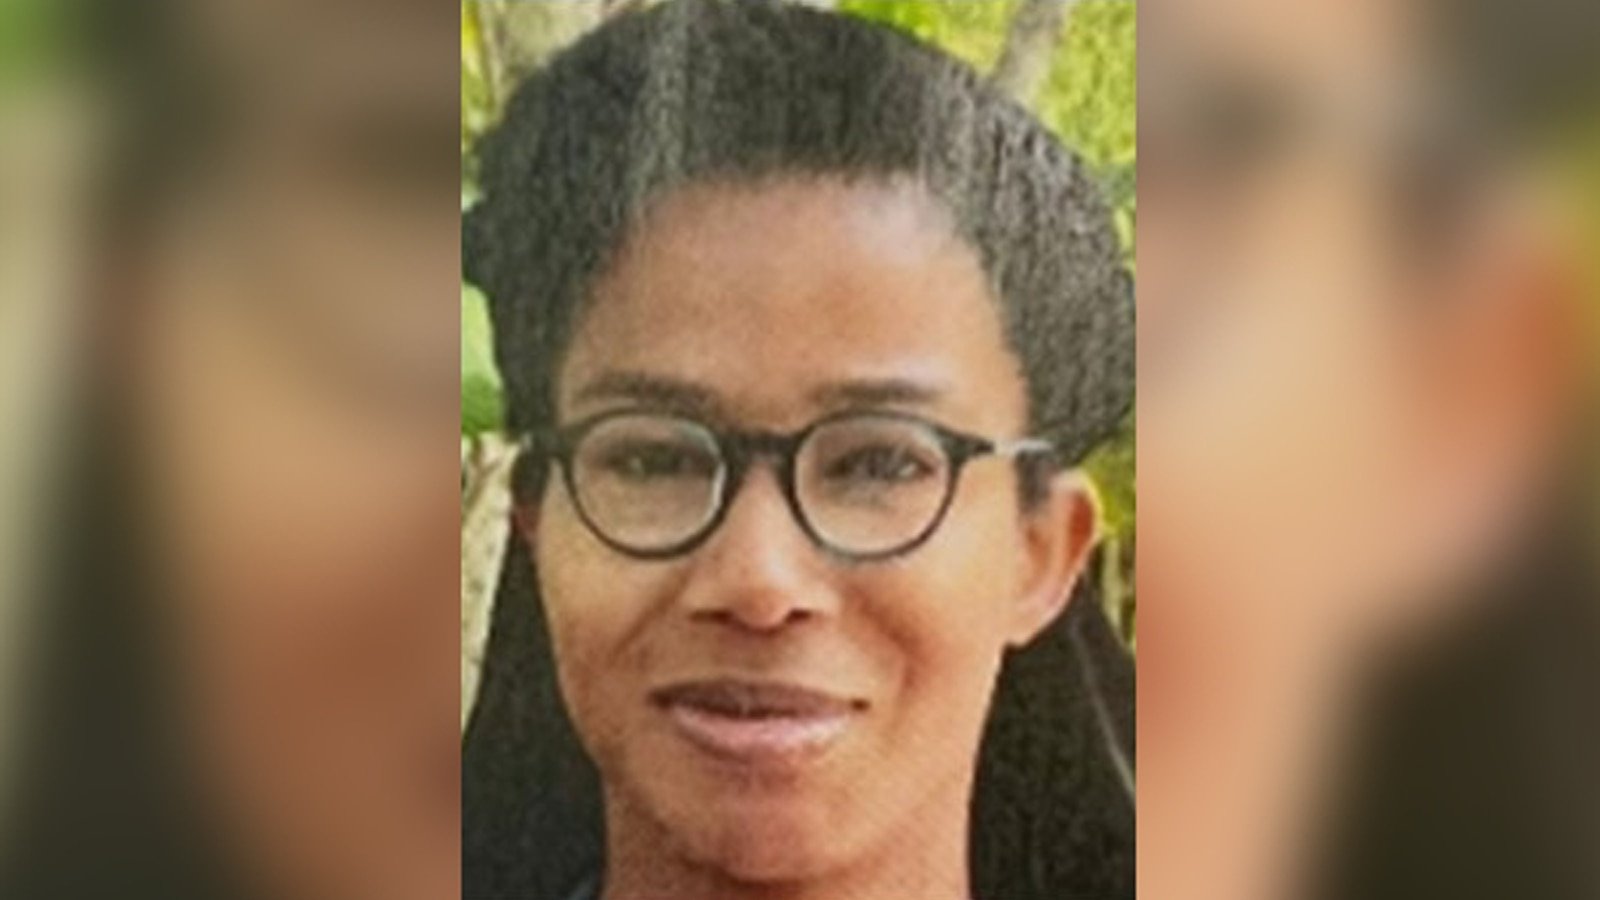 Search for woman who went missing in the Bahamas expands: Police